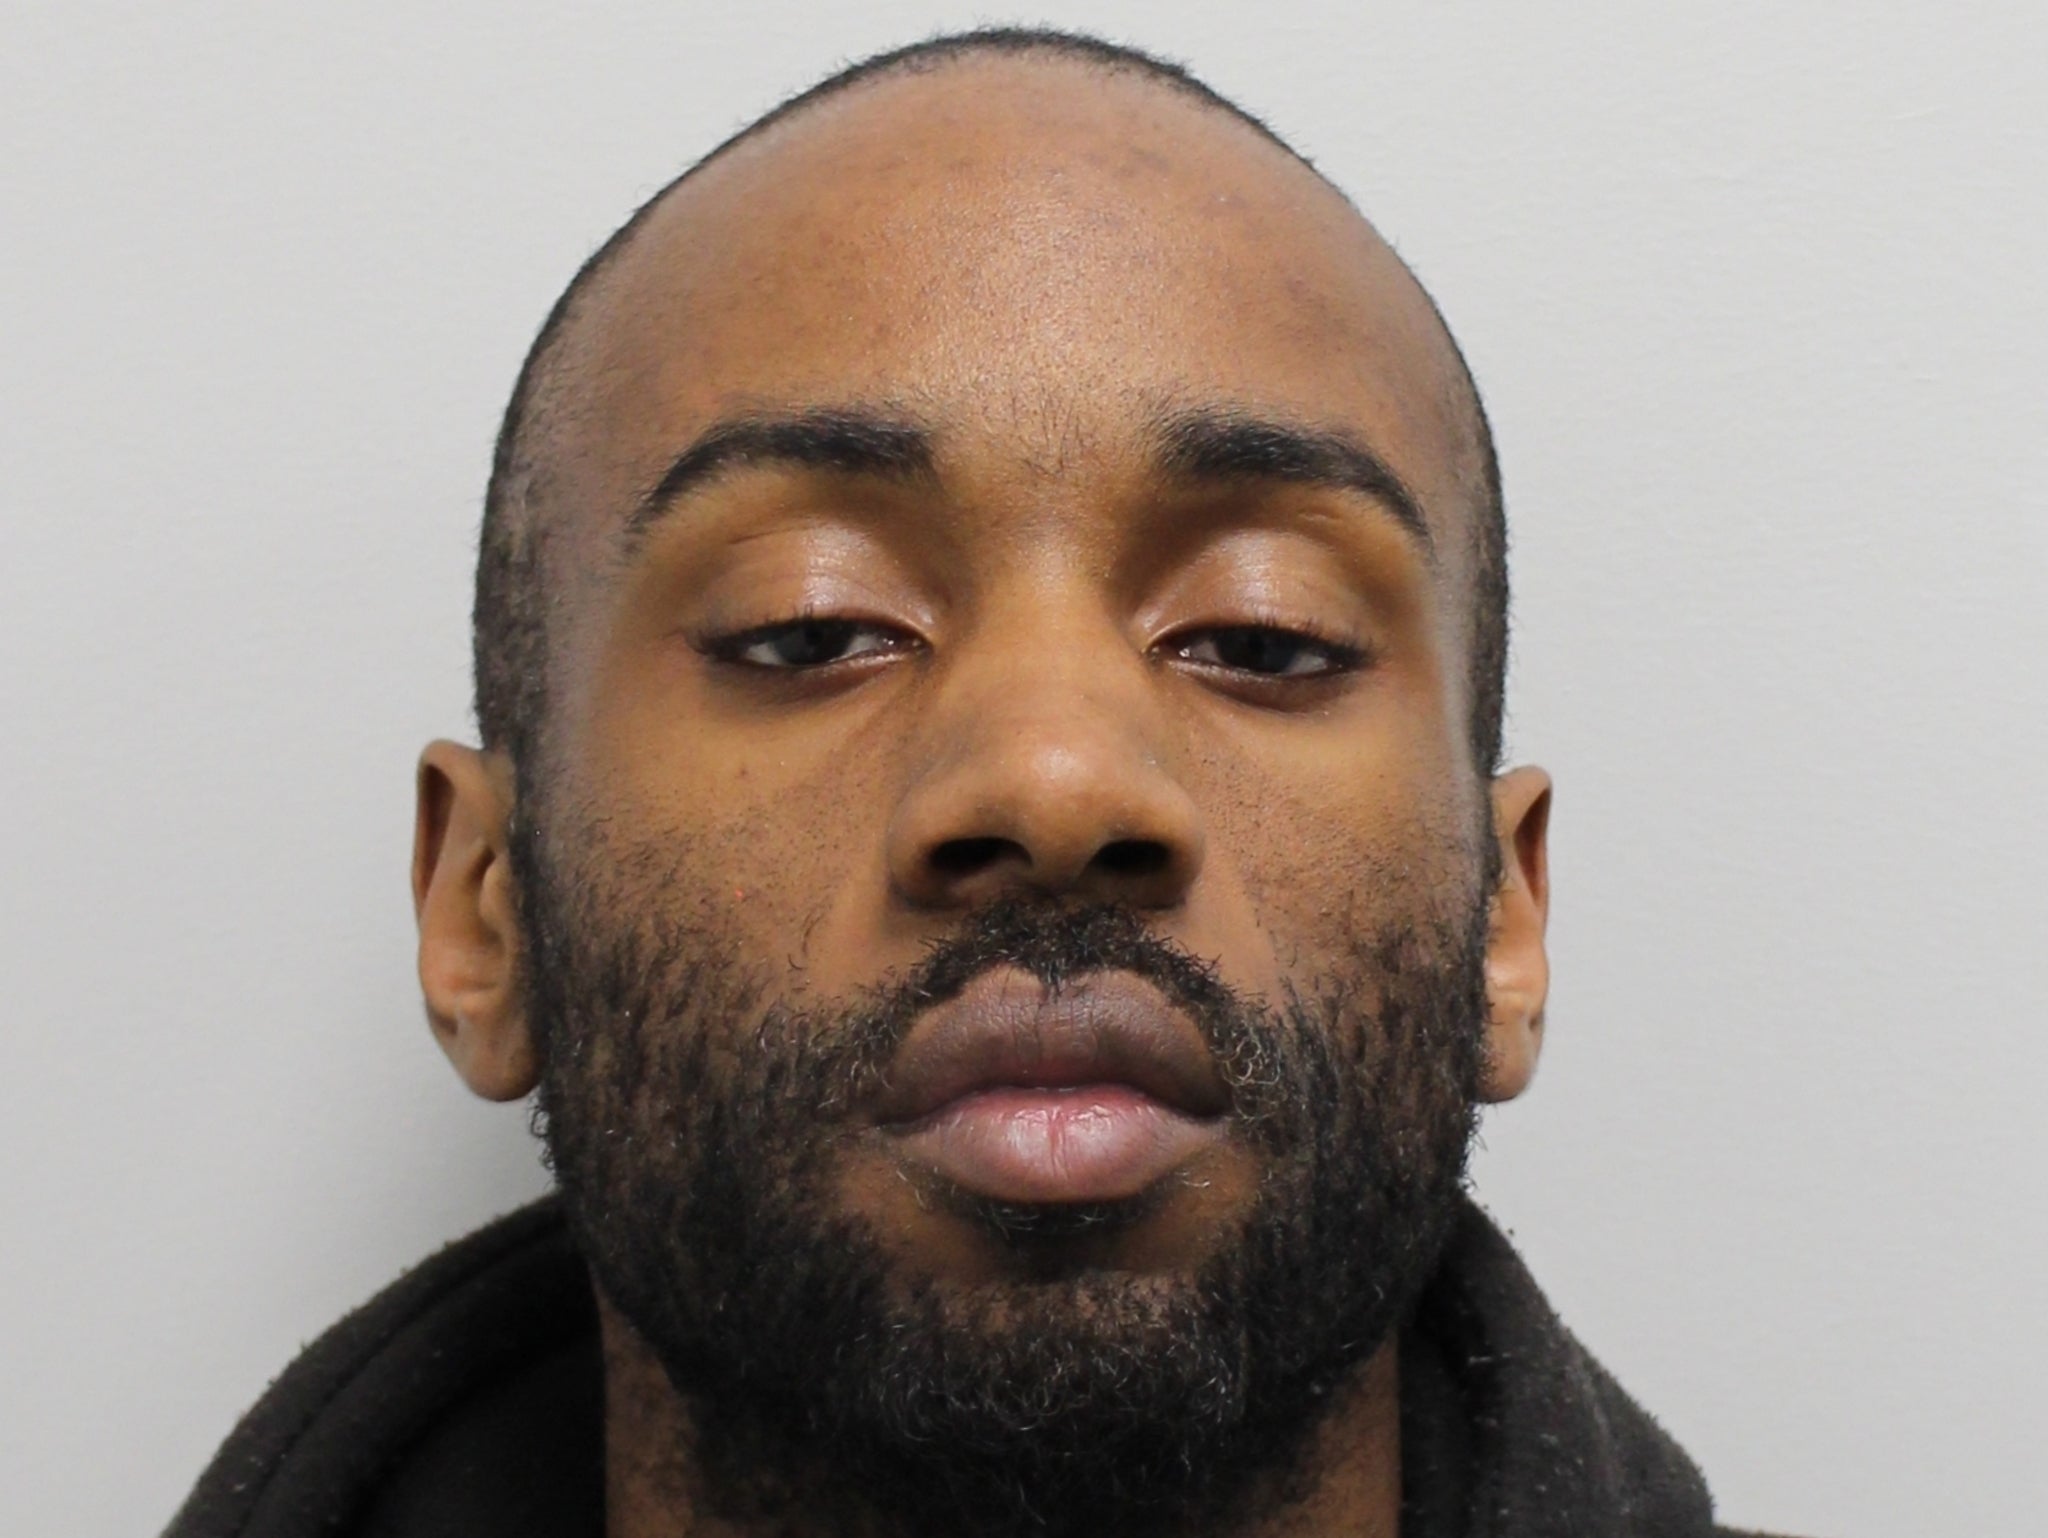 Jamel Nwokoye, 30, was jailed for trying to rape a woman in Hackney